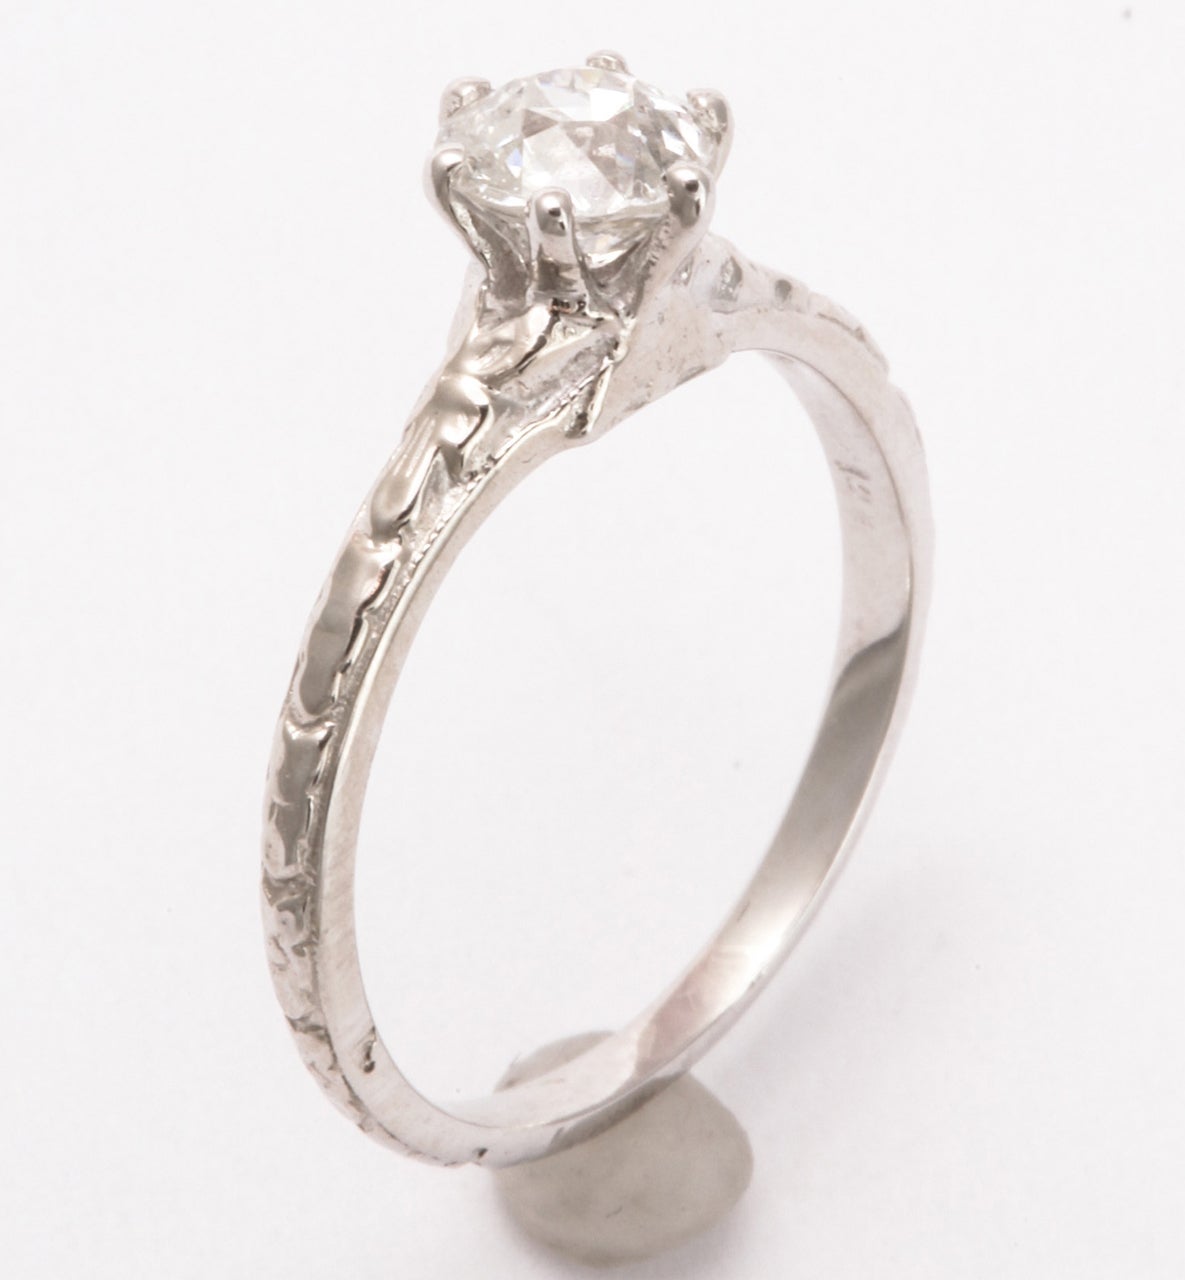 Those who treasure petite diamond rings and bands of tiny diamonds will breathe a sigh at the sweetness of this .50 ct diamond.  The setting is hand made in 14 kt white gold. The band displays raised repousse engraving.  The diamond, constant in